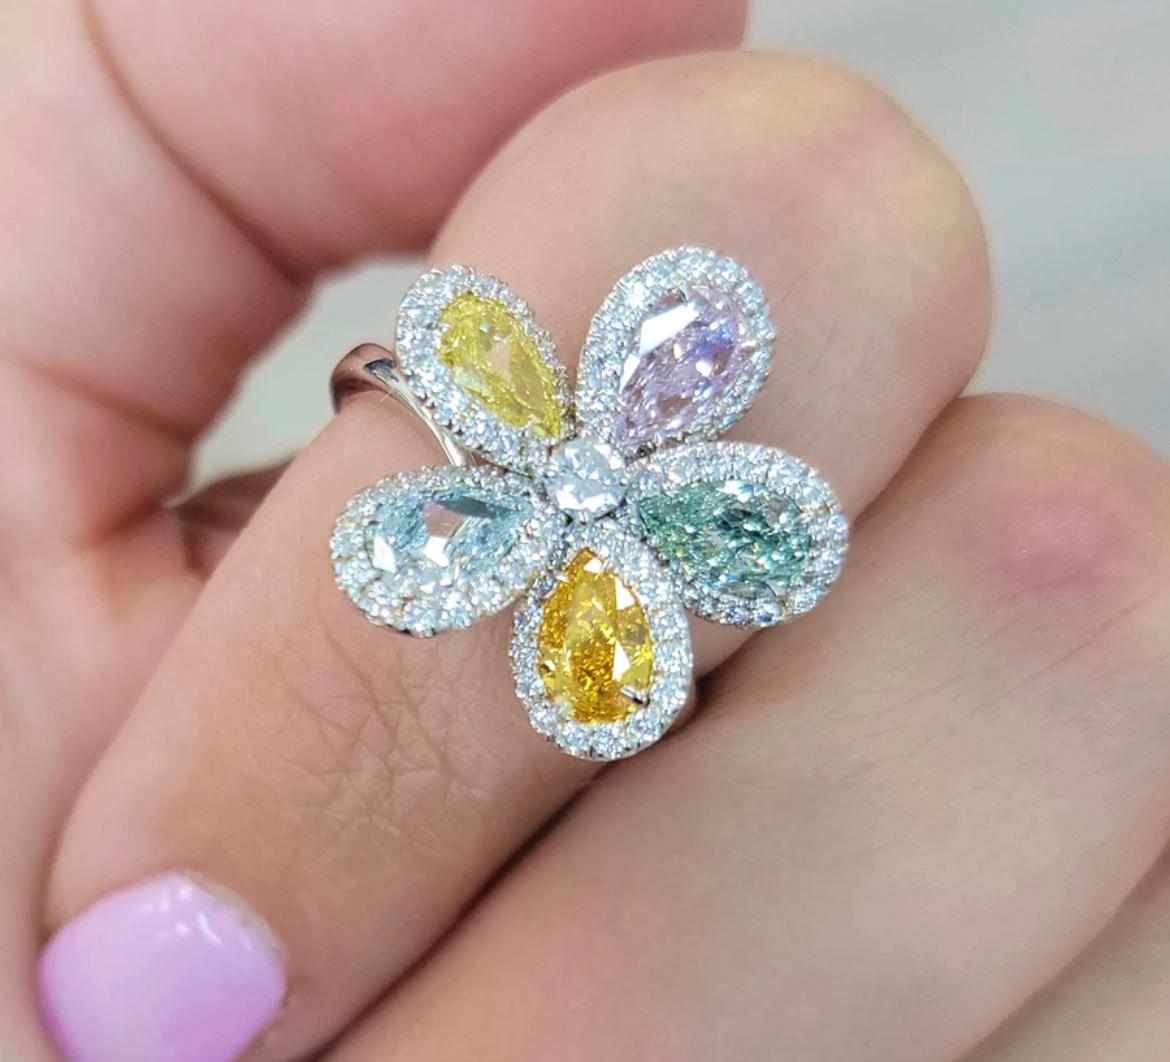 Original Namdar Diamonds piece designed and curated by Daniel Namdar; an exquisite compilation of earths treasures in one beautiful flower ring
All natural GIA certified multi colored Pear shapes set in Platinum with half a carat of white round